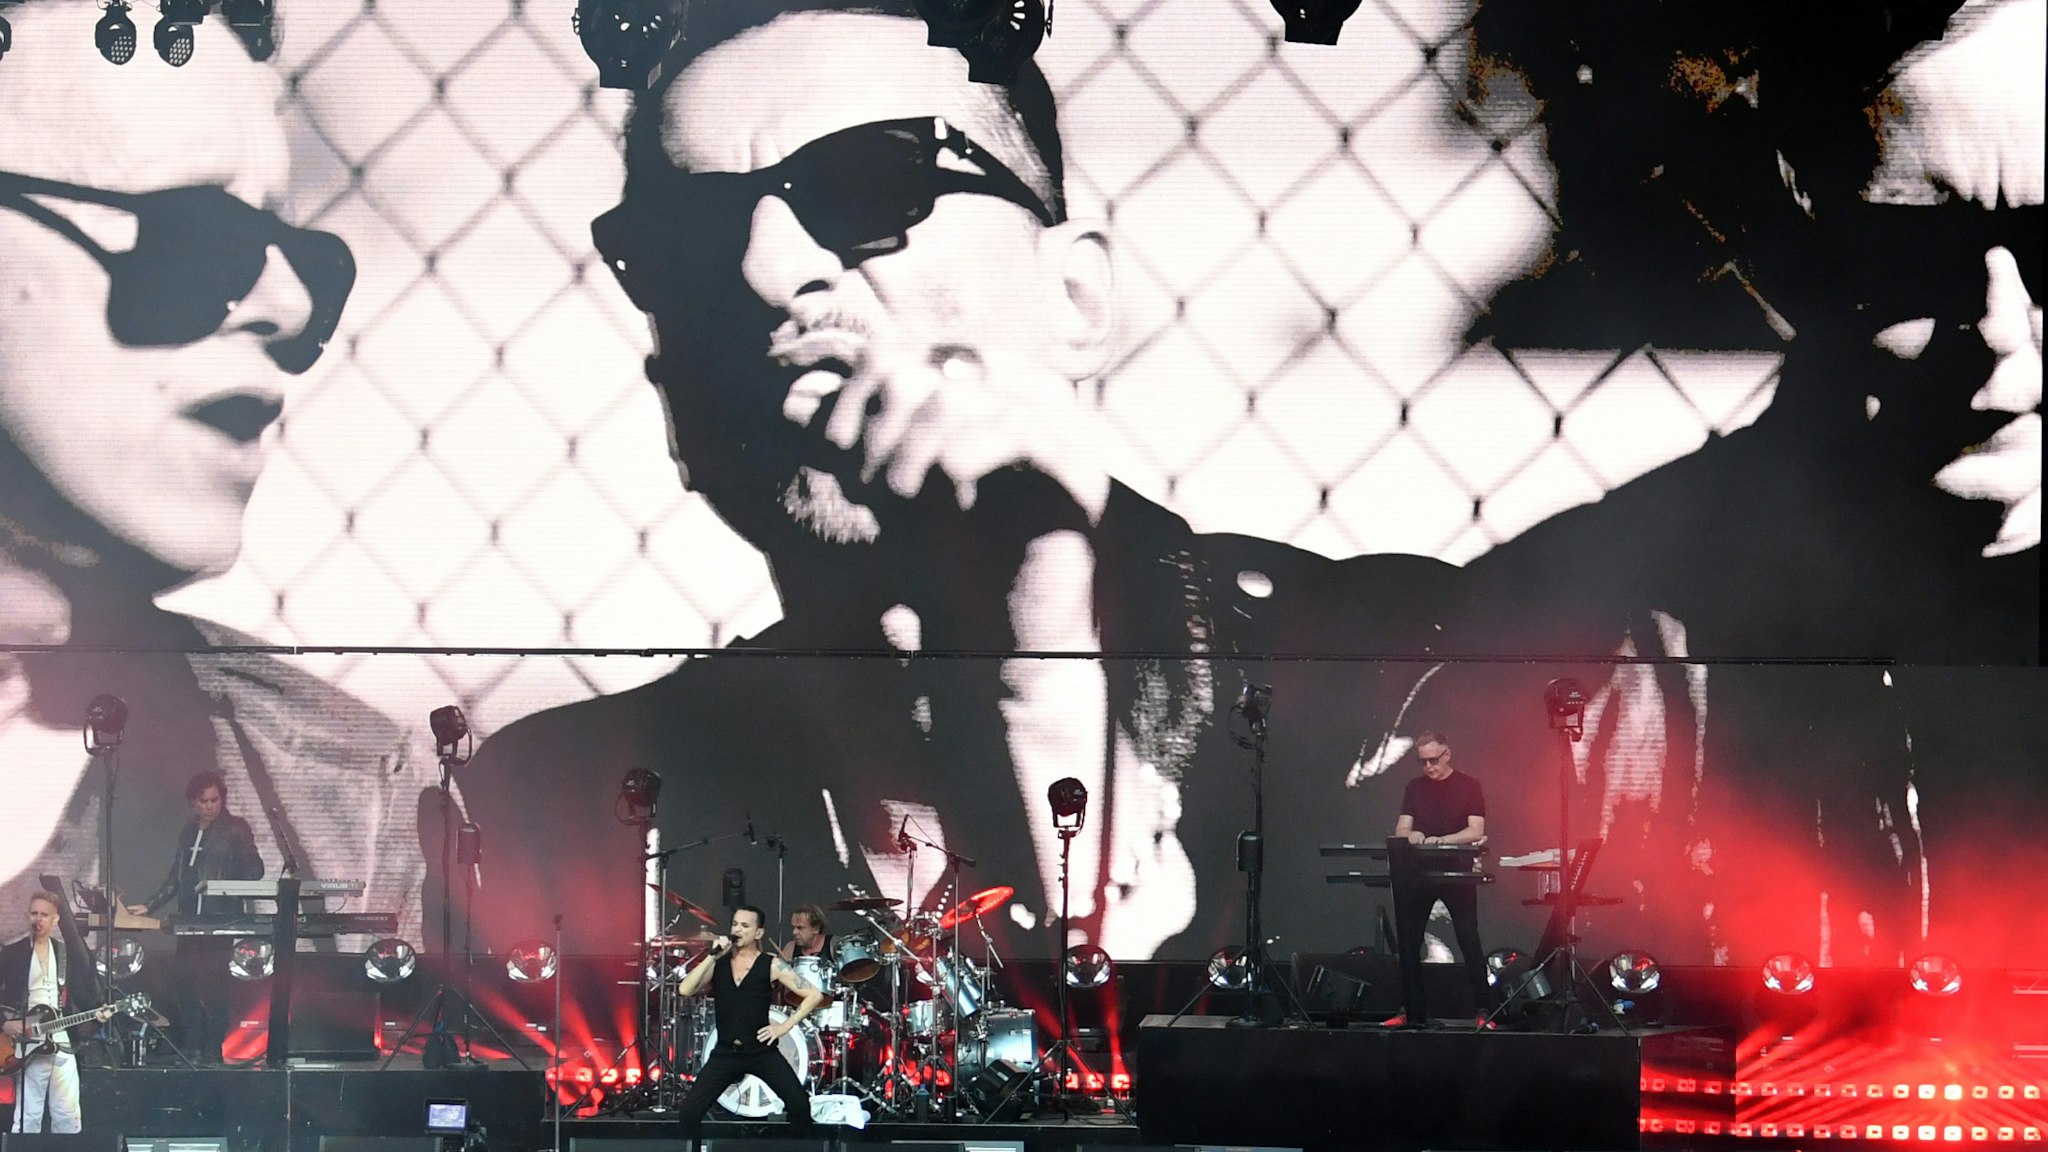 Dave Gahan, singer and frontman, Martin Gore (keyboard, guitars) and Andy Fletcher (keyboard) of the band "Depeche Mode" performing during the last concert of the band's "Global Spirit" world tour in the Waldbuehne, while a they appear in a videoclip in the background.